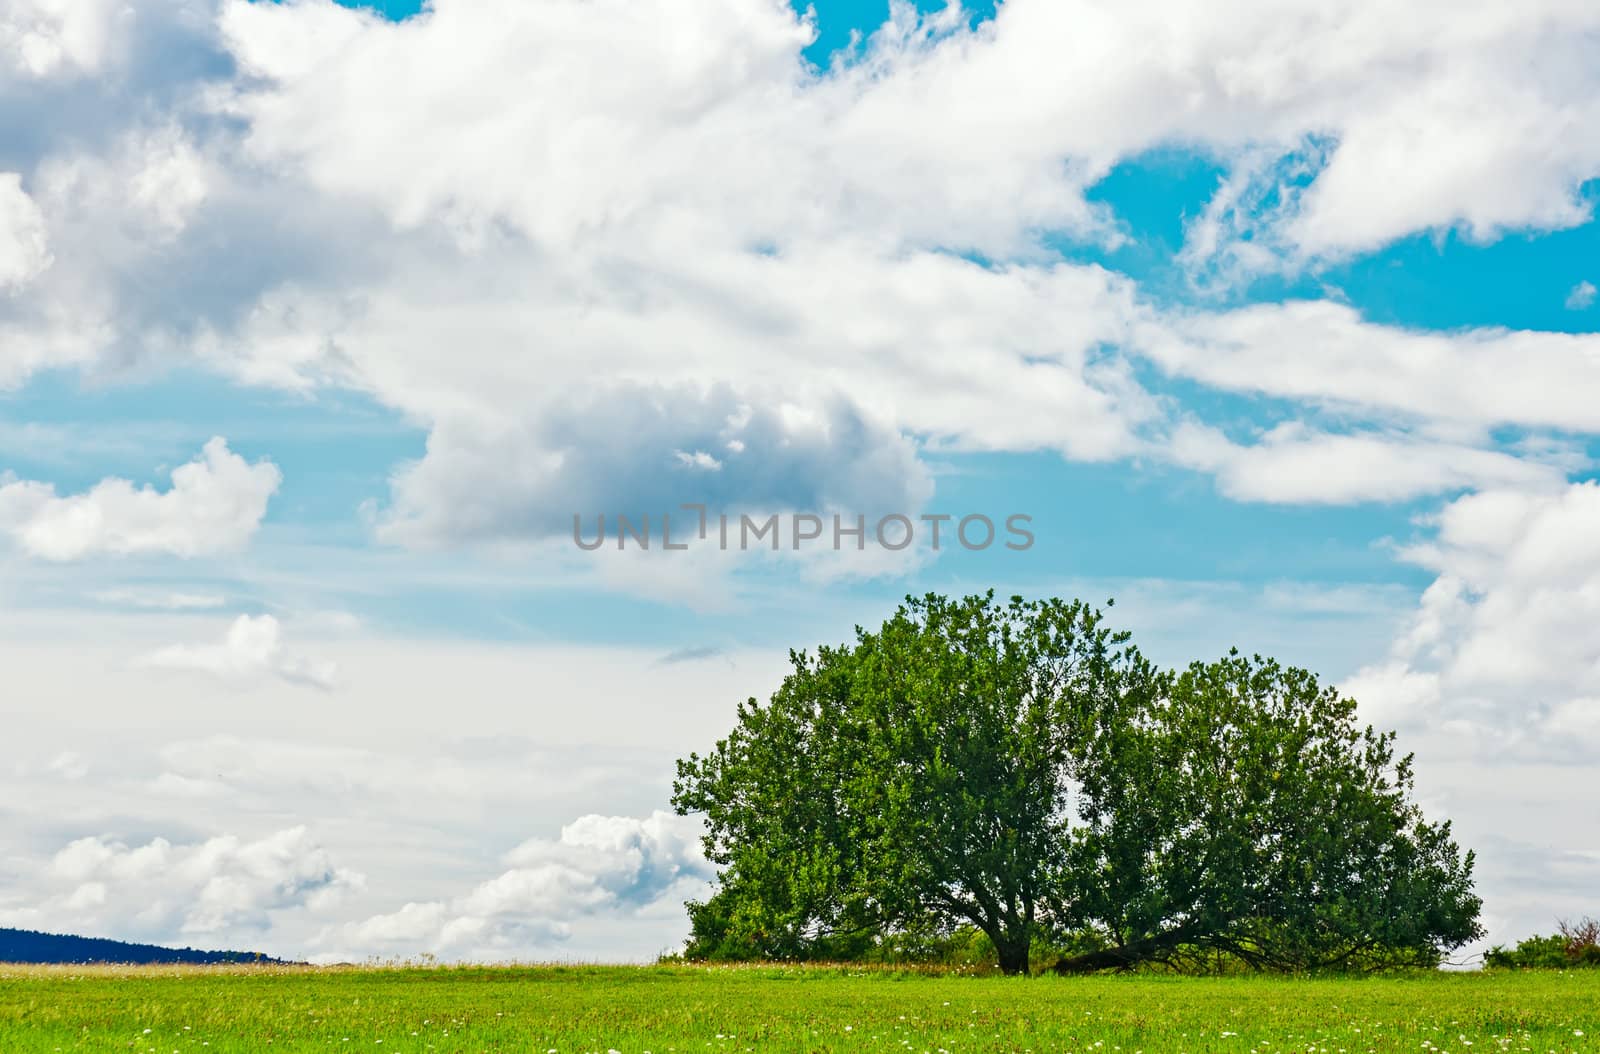 This image shows a tree at a meadow